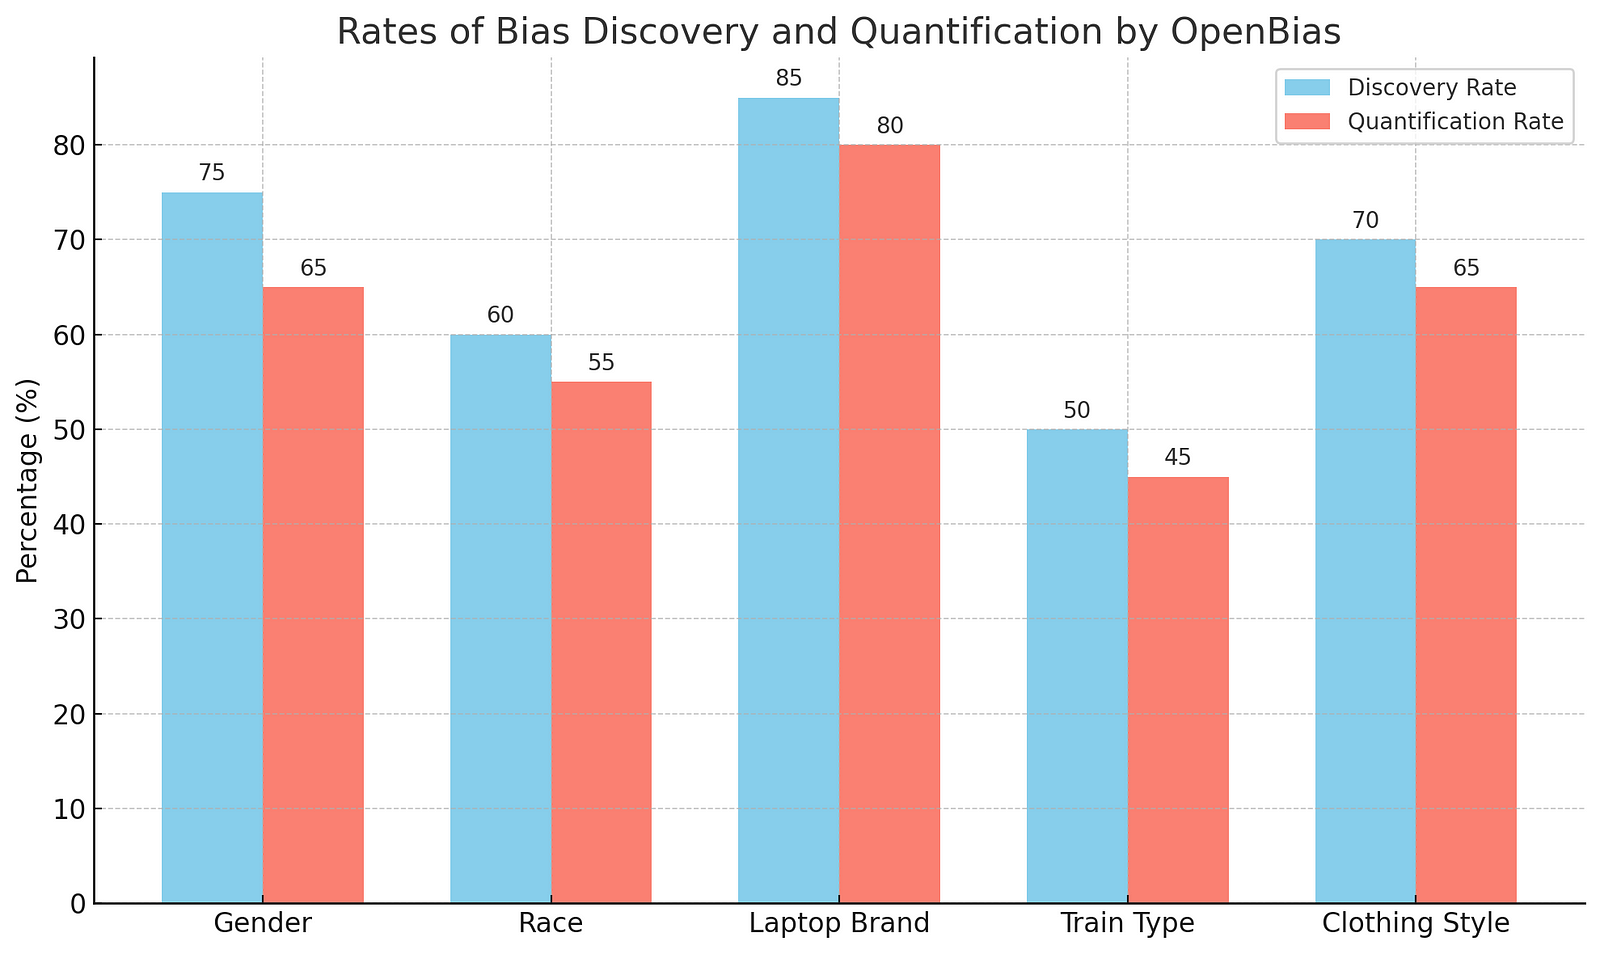 Bar graph displaying the rates of bias discovery and quantification in various categories such as Gender, Race, Laptop Brand, Train Type, and Clothing Style, using colors sky blue and salmon for each category respectively.